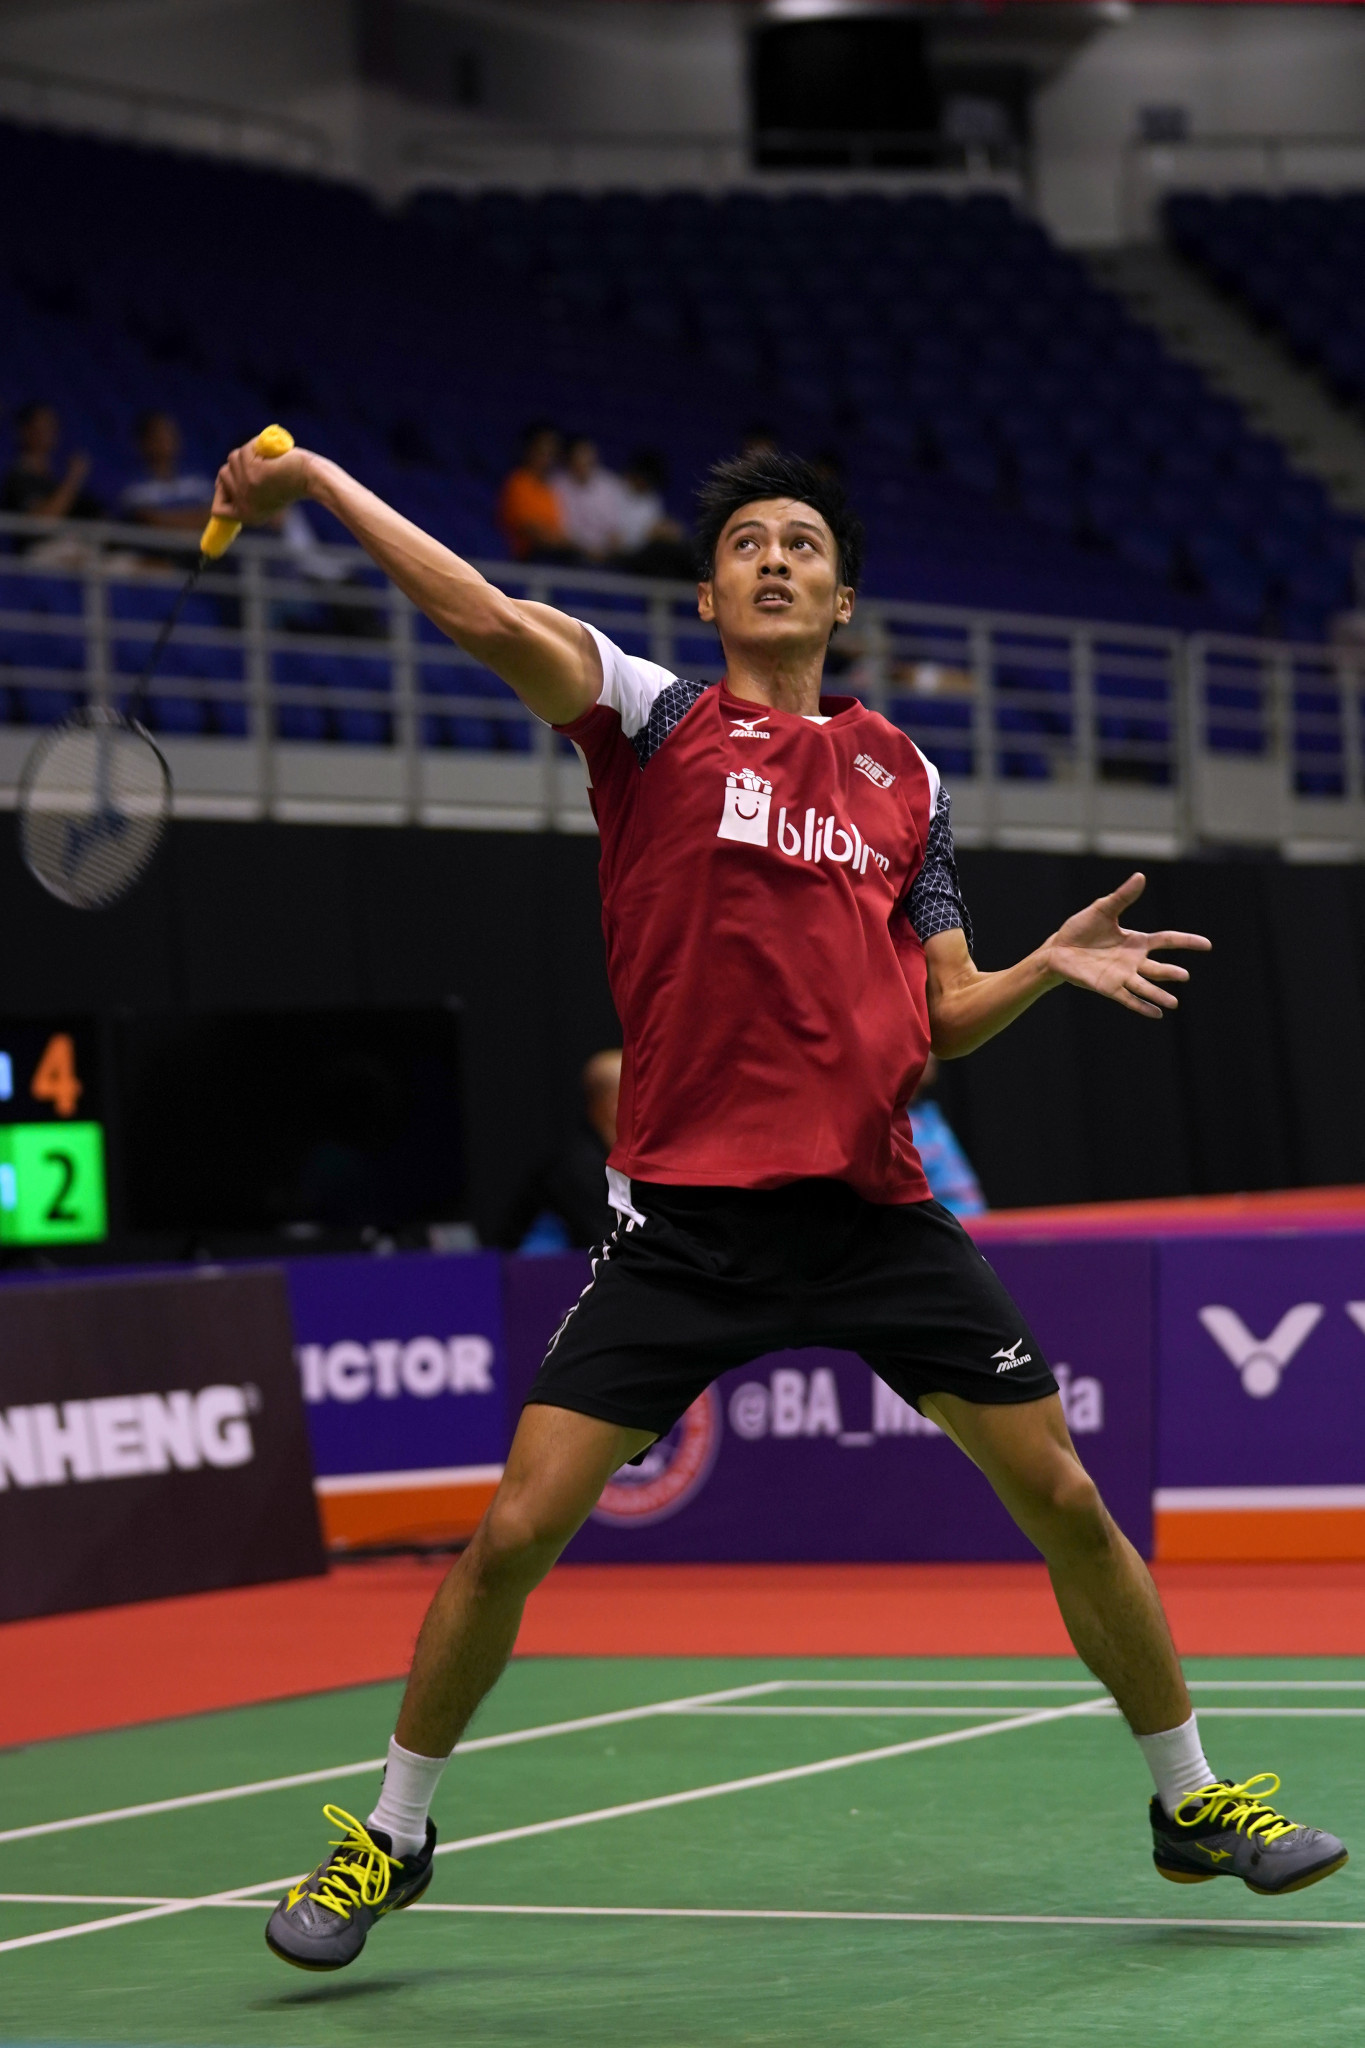 Second seed Shesar Hiren Rhustavito of Indonesia is through to the men's singles semi-finals ©Getty Images